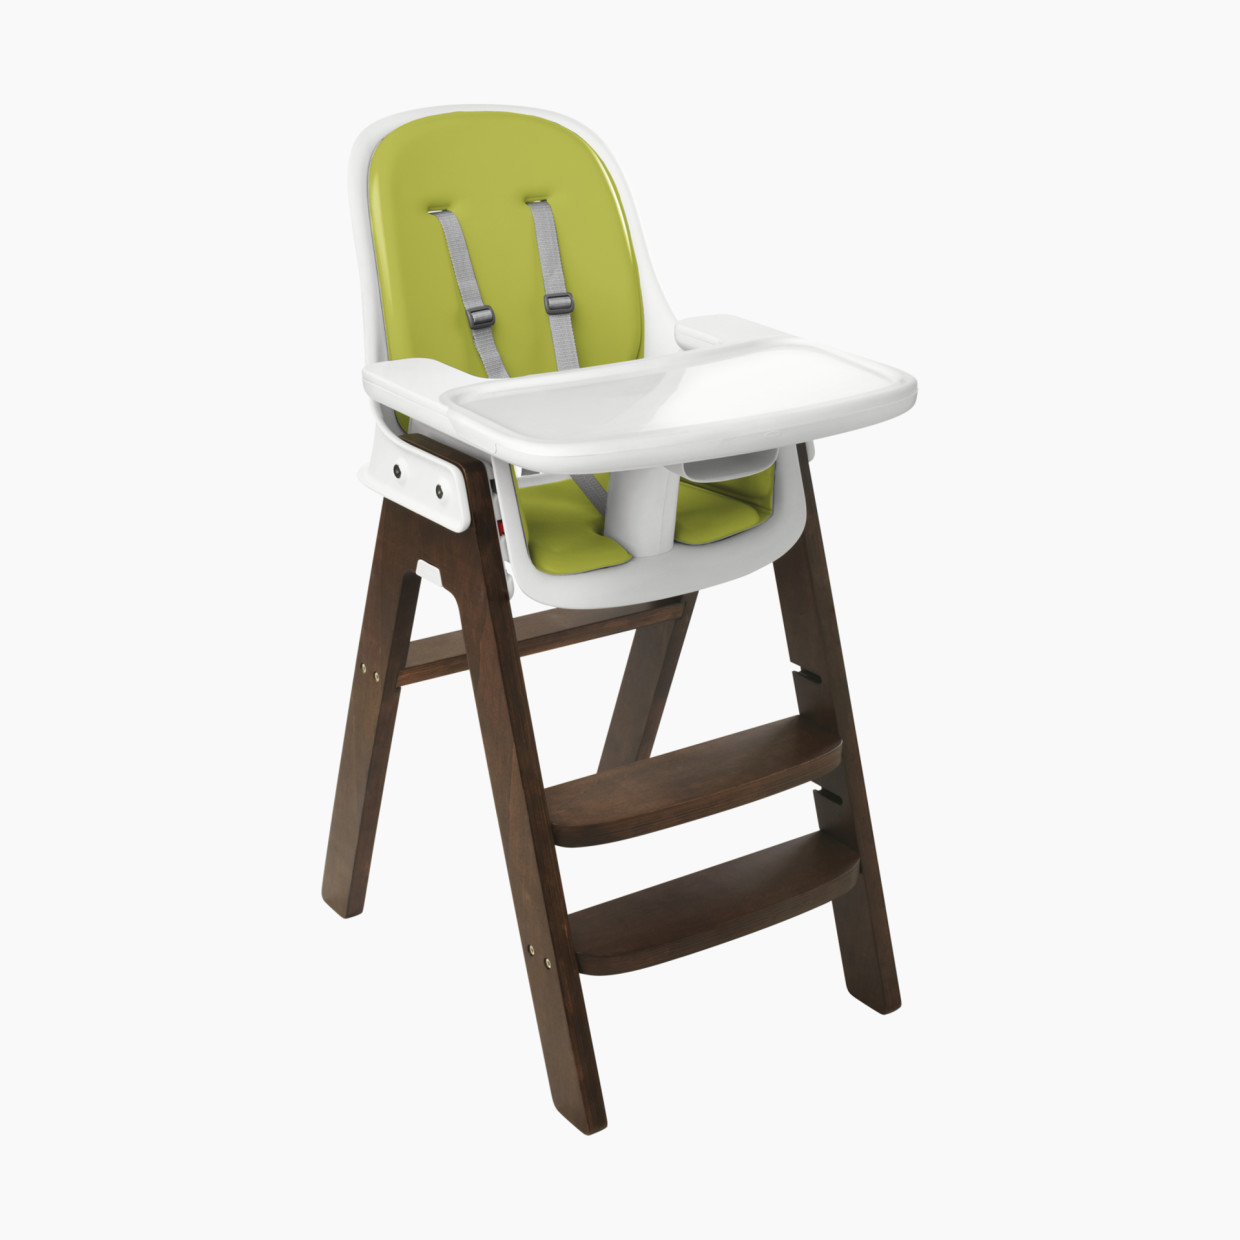 OXO Tot Sprout High Chair - Green/Walnut.